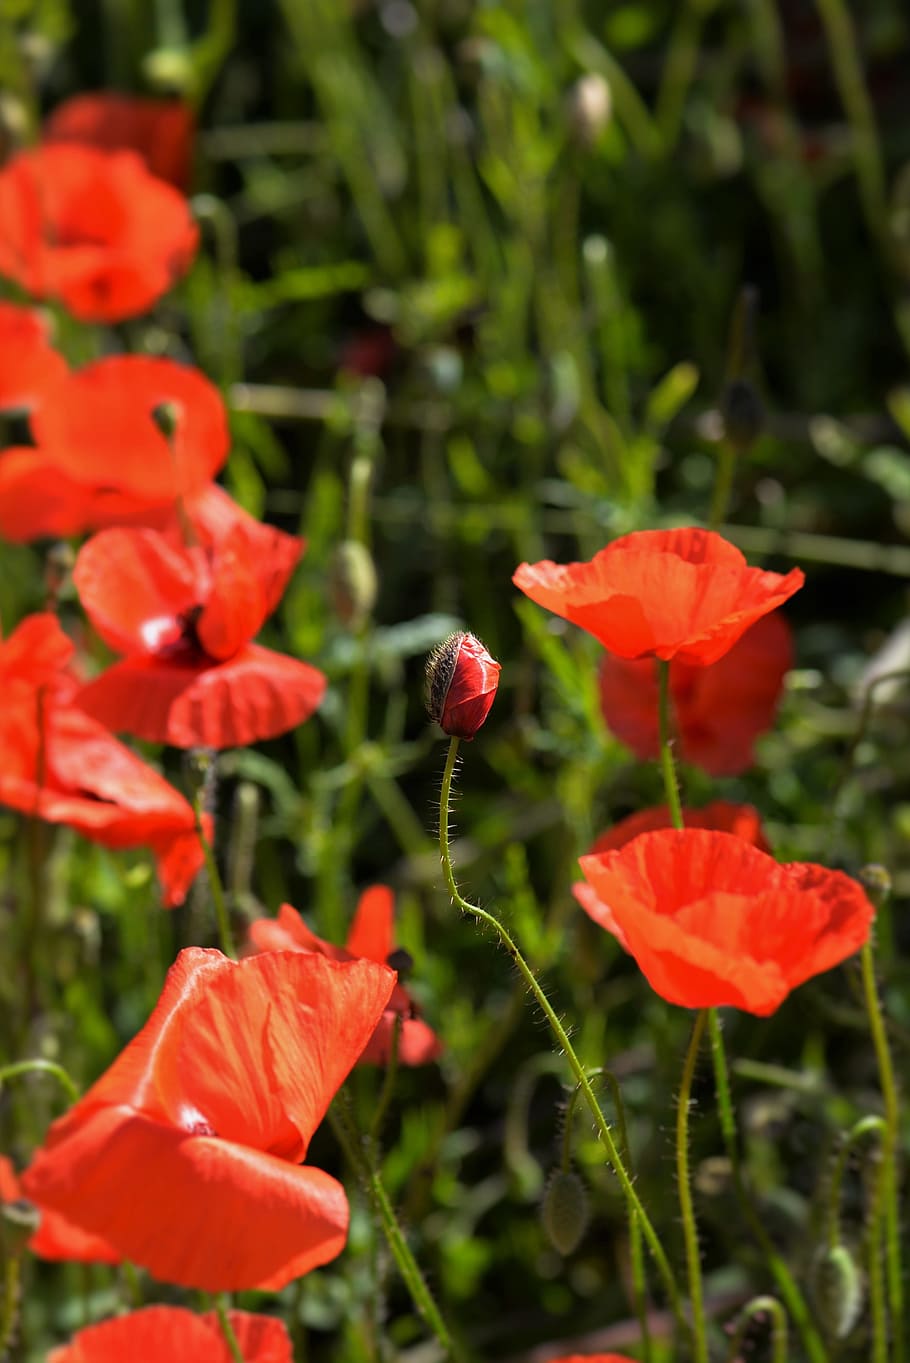 Poppies, Capsule, Meadow, red, plant, flower, growth, nature, outdoors, beauty in nature